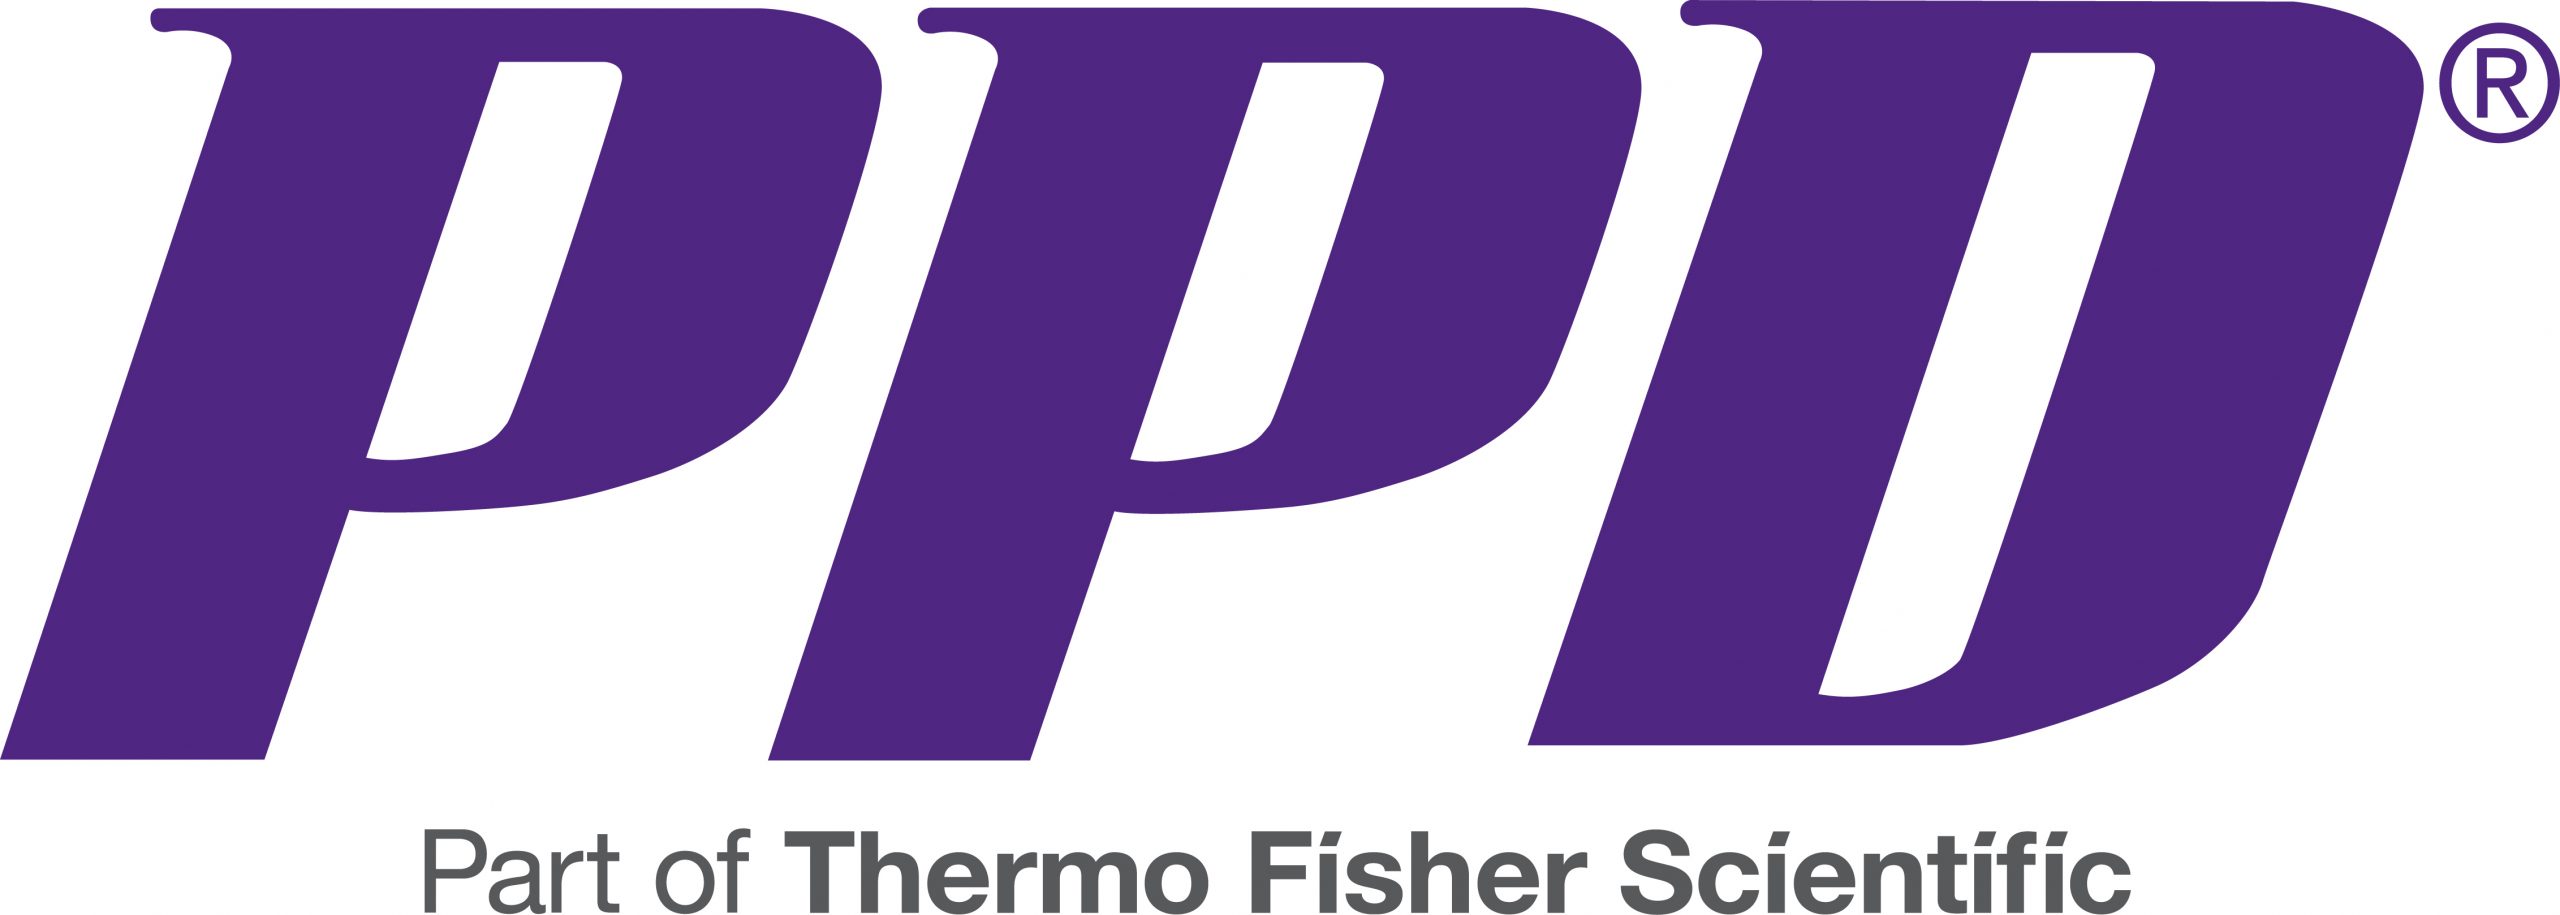 PPD, PART OF THERMO FISHER SCIENTIFIC